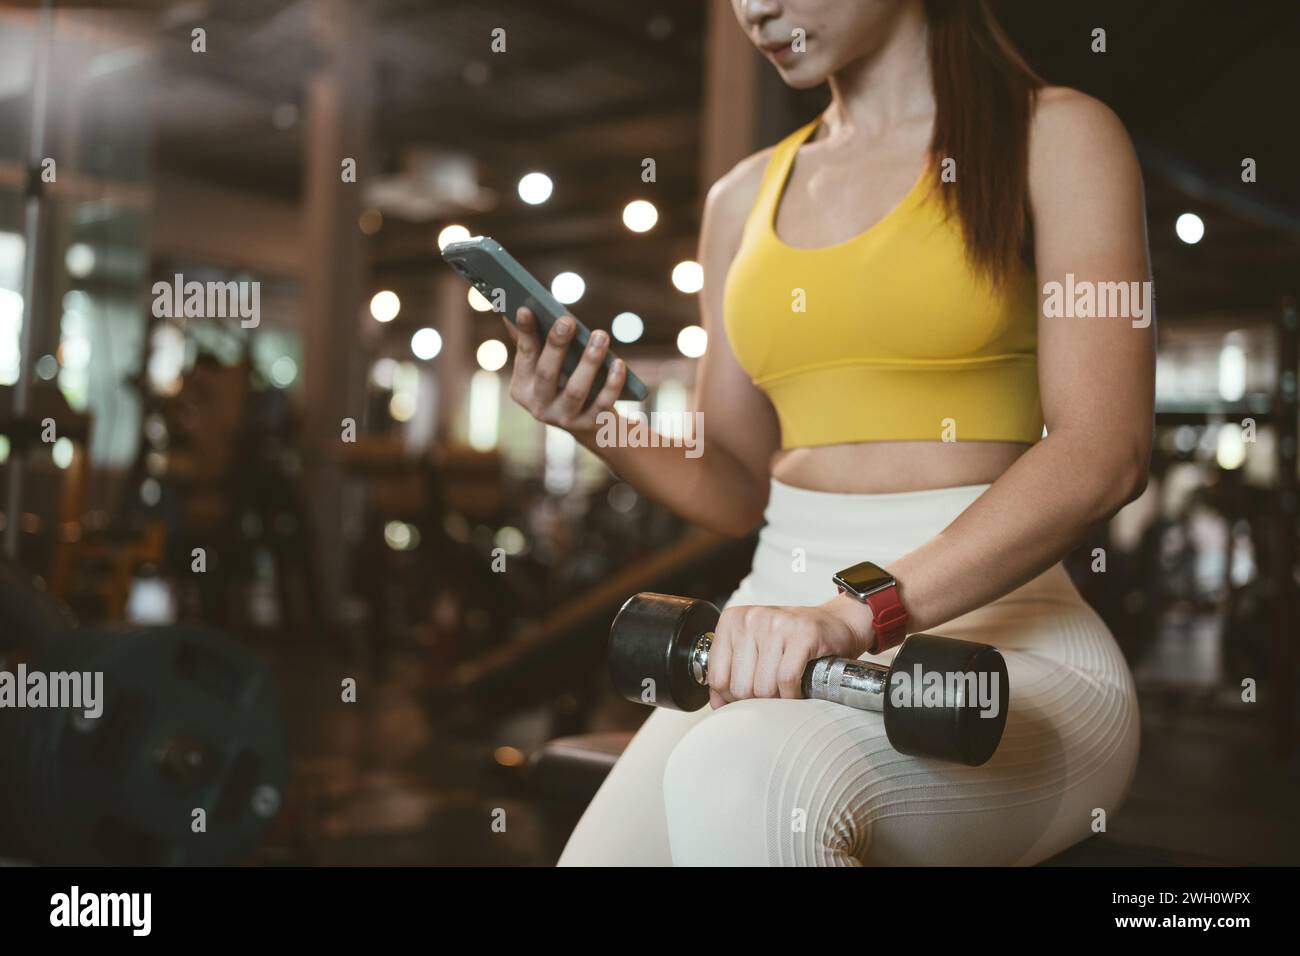 Young aisan woman using a phone in the gym. Stock Photo